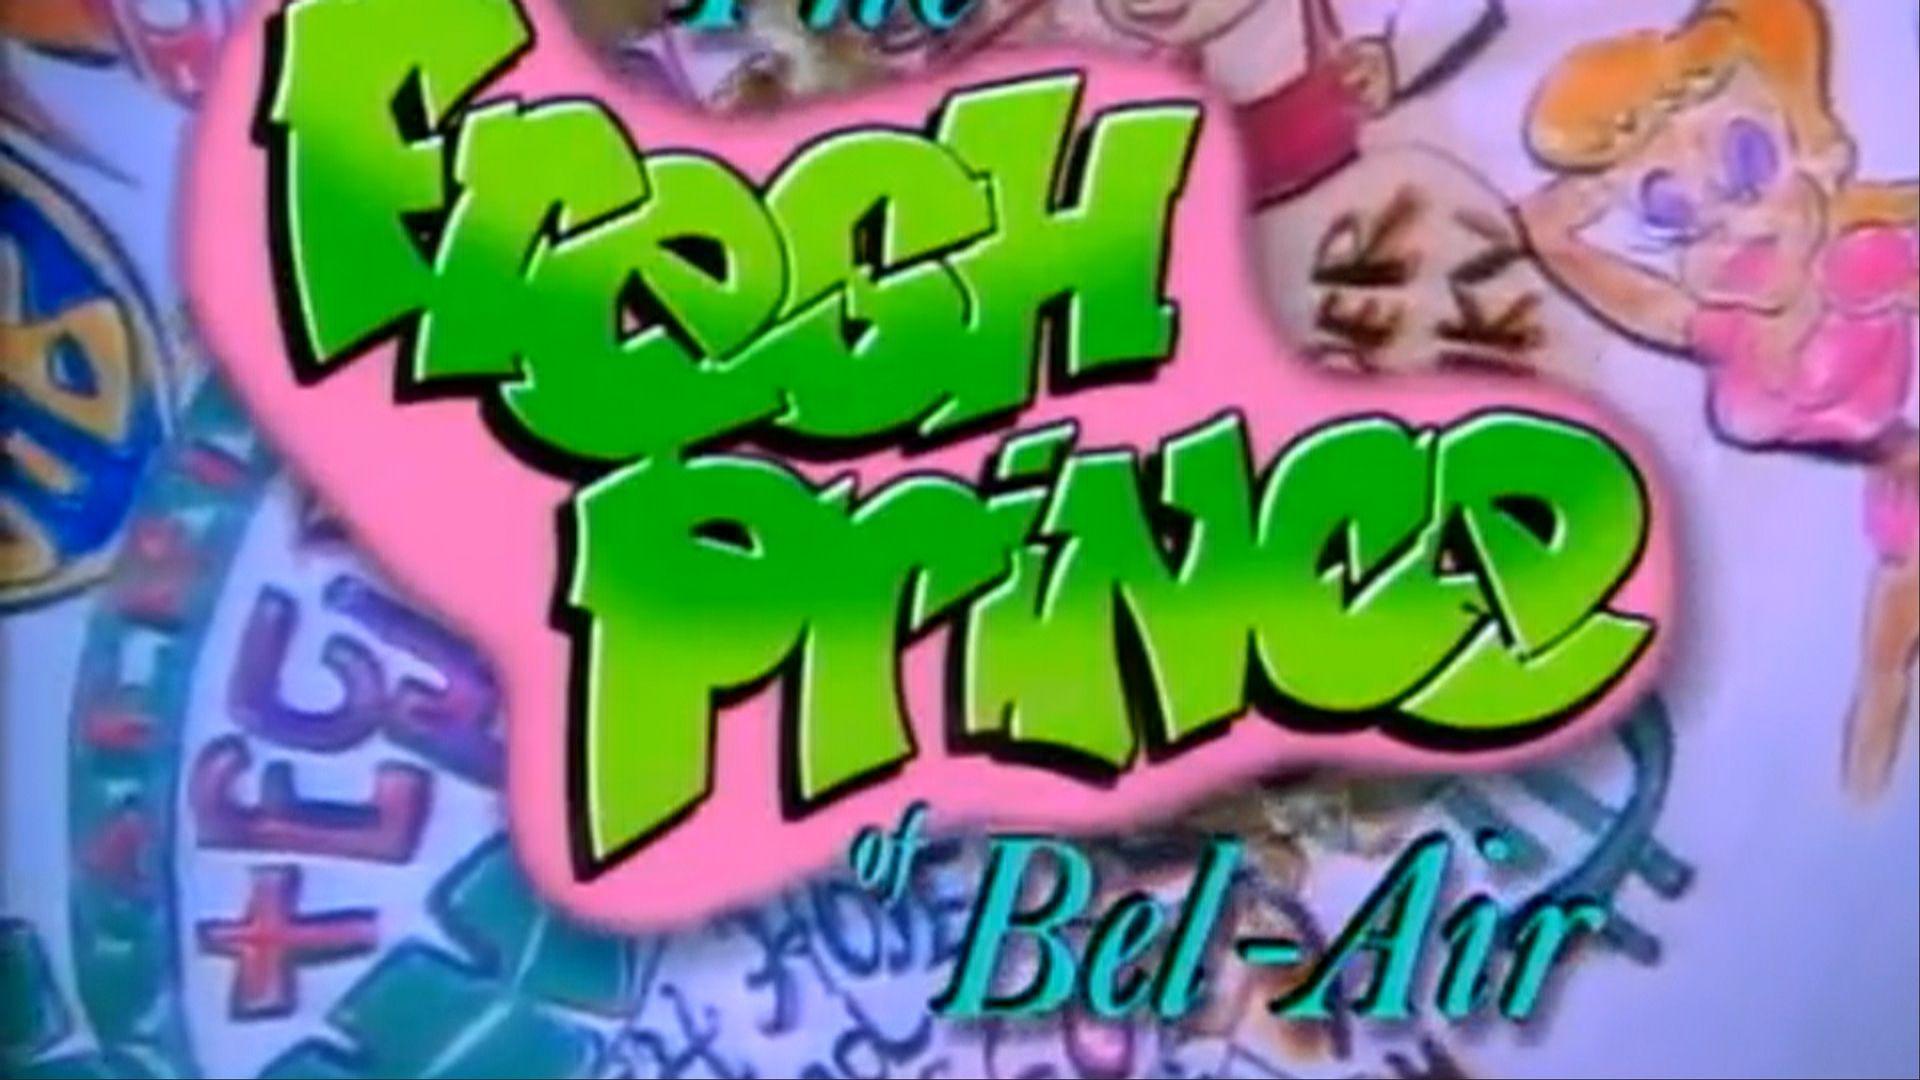 Fresh Prince of Bel Air' reboot being developed by Will Smith